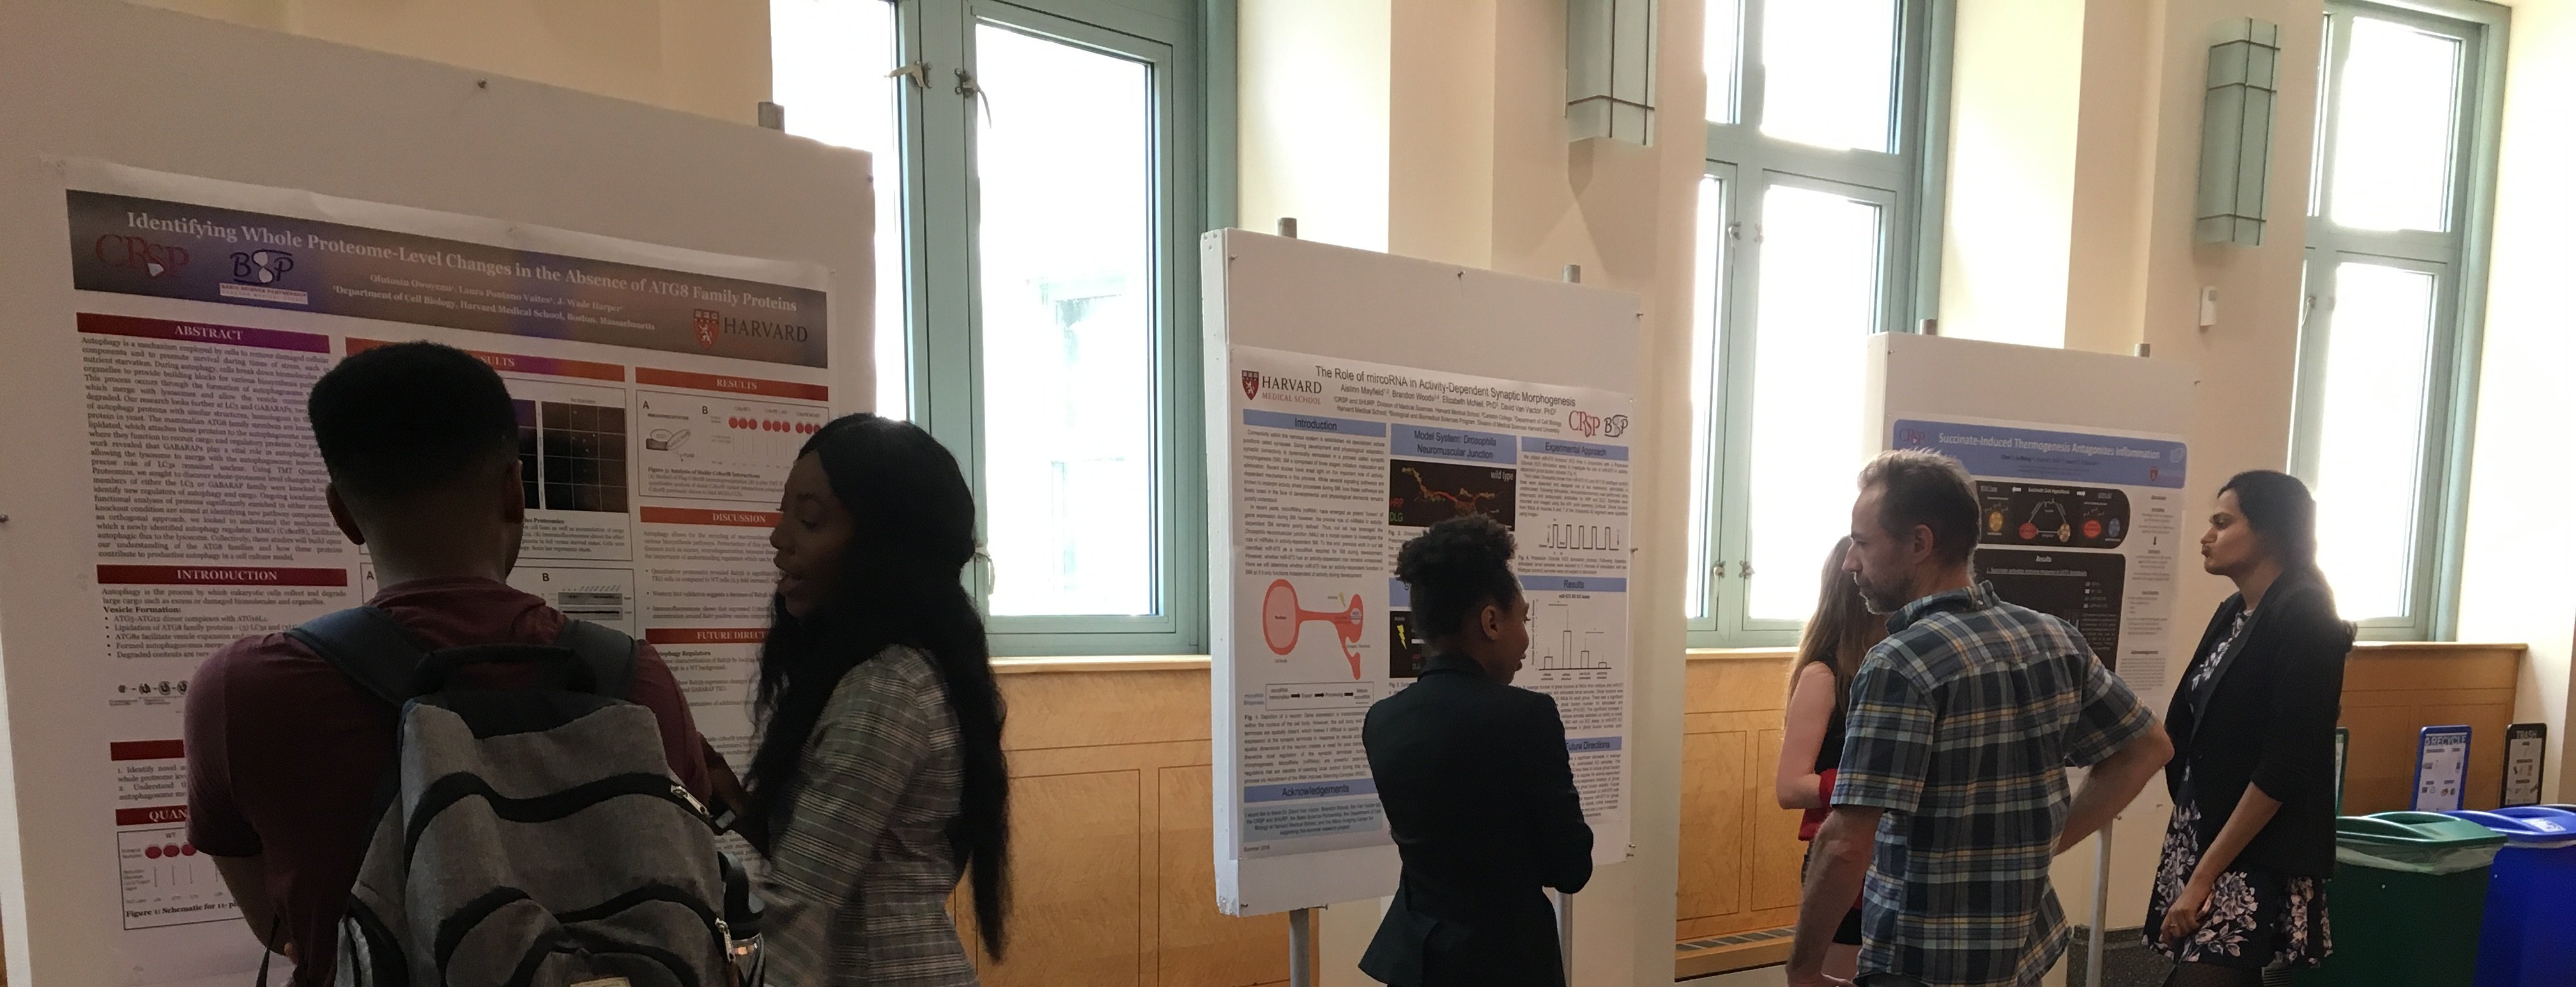 CRSP students present their summer research at a poster session.